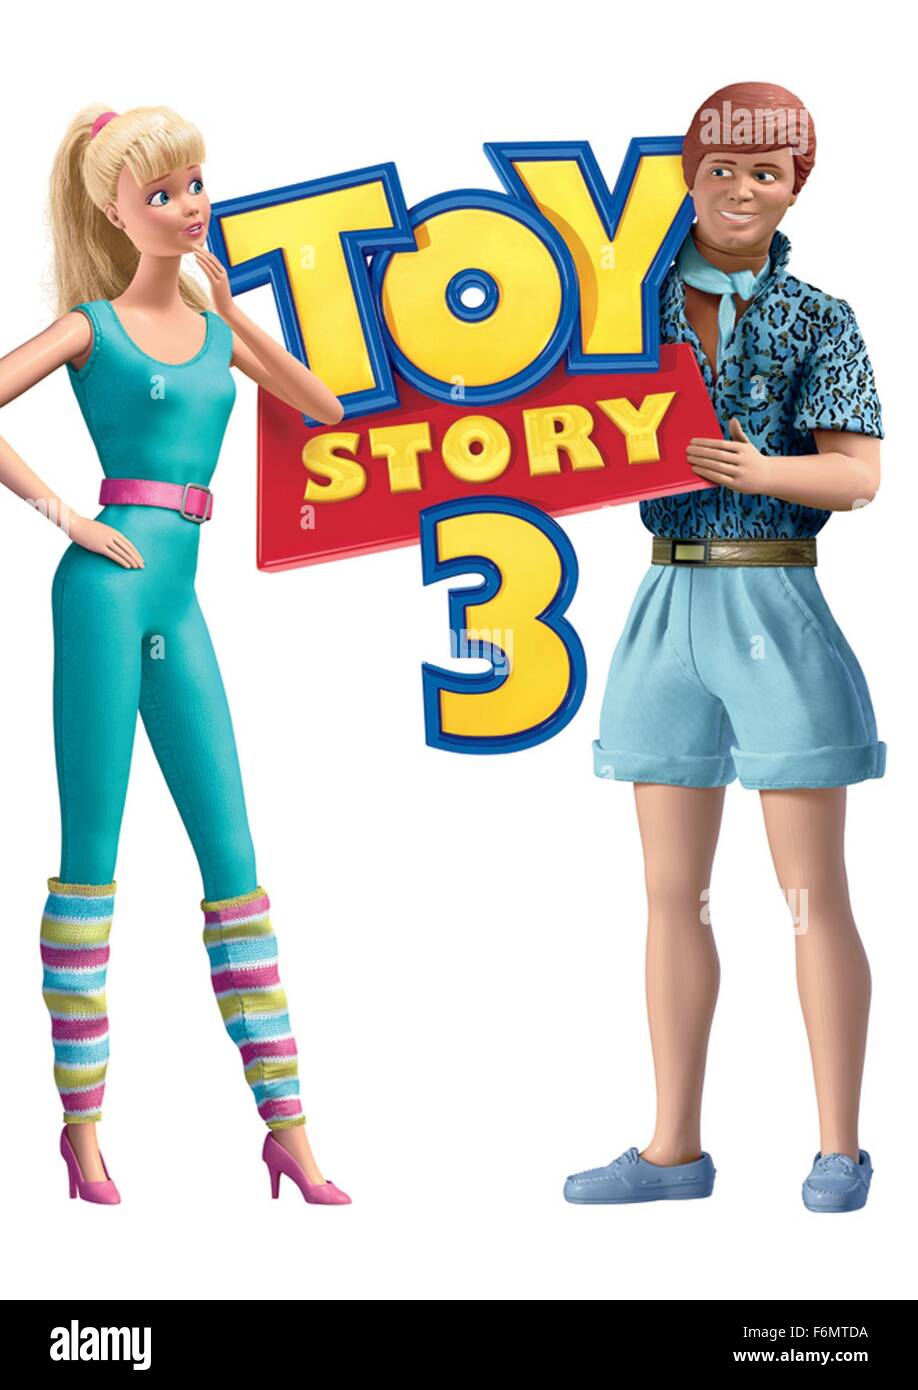 RELEASE DATE: June 18, 2010   MOVIE TITLE: Toy Story 3   STUDIO: Disney Pixar   DIRECTOR: Lee Unkrich   PLOT: Woody, Buzz, and the rest of their toy-box friends are dumped in a day-care center after their owner, Andy, departs for college   PICTURED: Barbie and Ken   (Credit Image: c Disney Pixar/Entertainment Pictures) Stock Photo